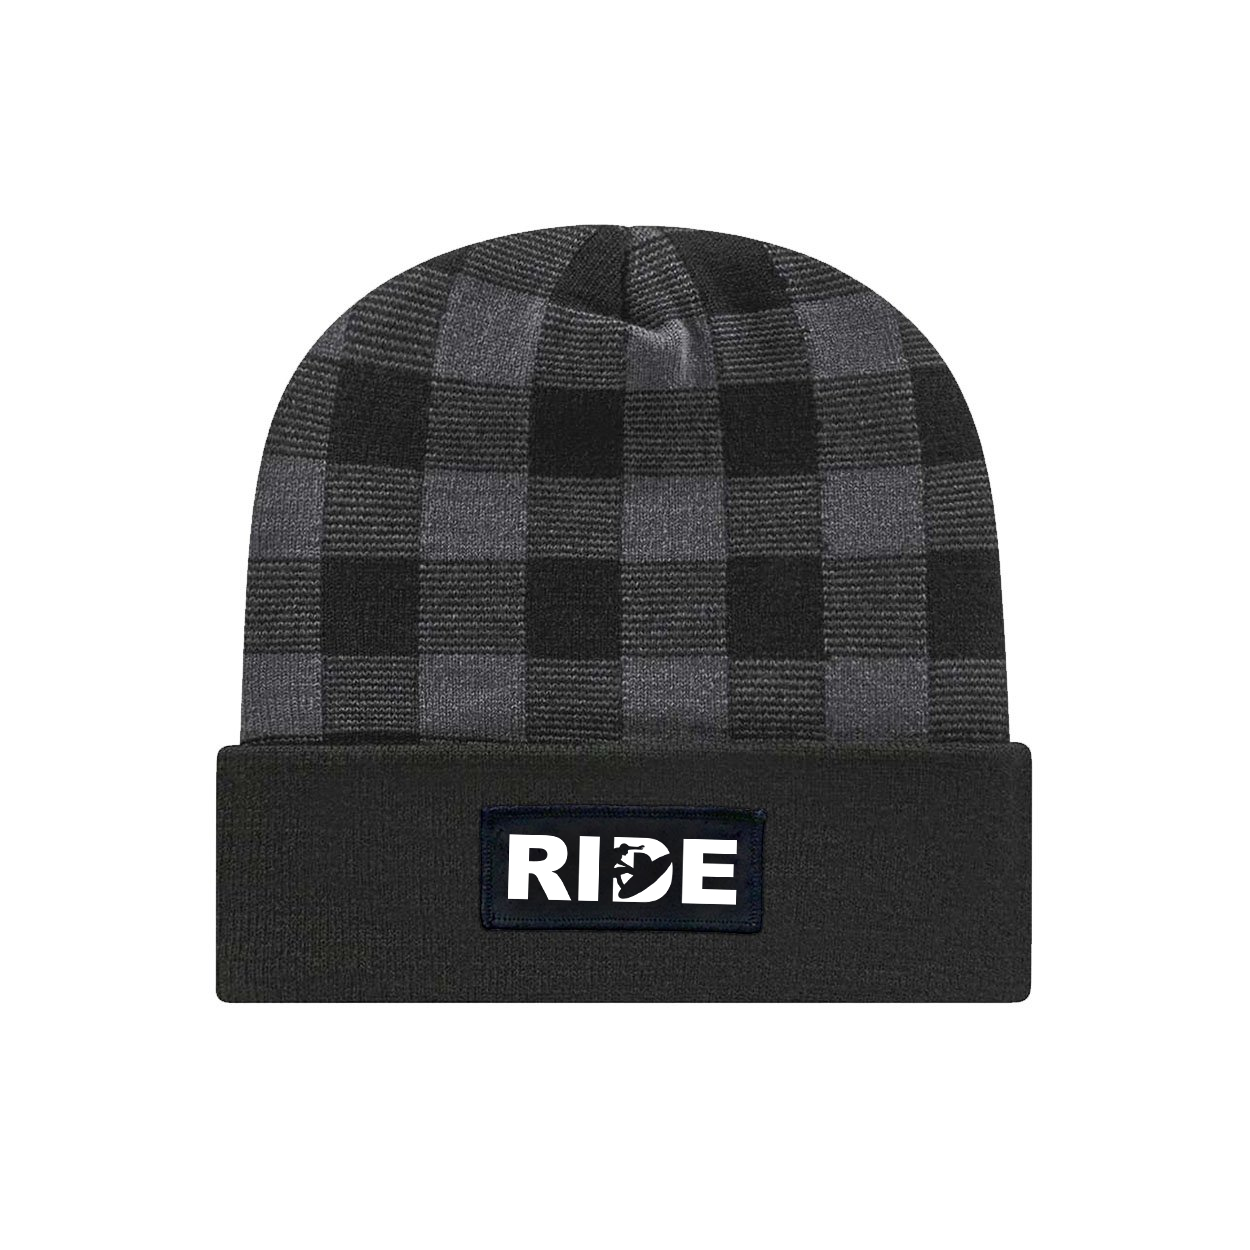 Ride Surf Logo Night Out Woven Patch Roll Up Plaid Beanie Black/Heather Gray (White Logo)